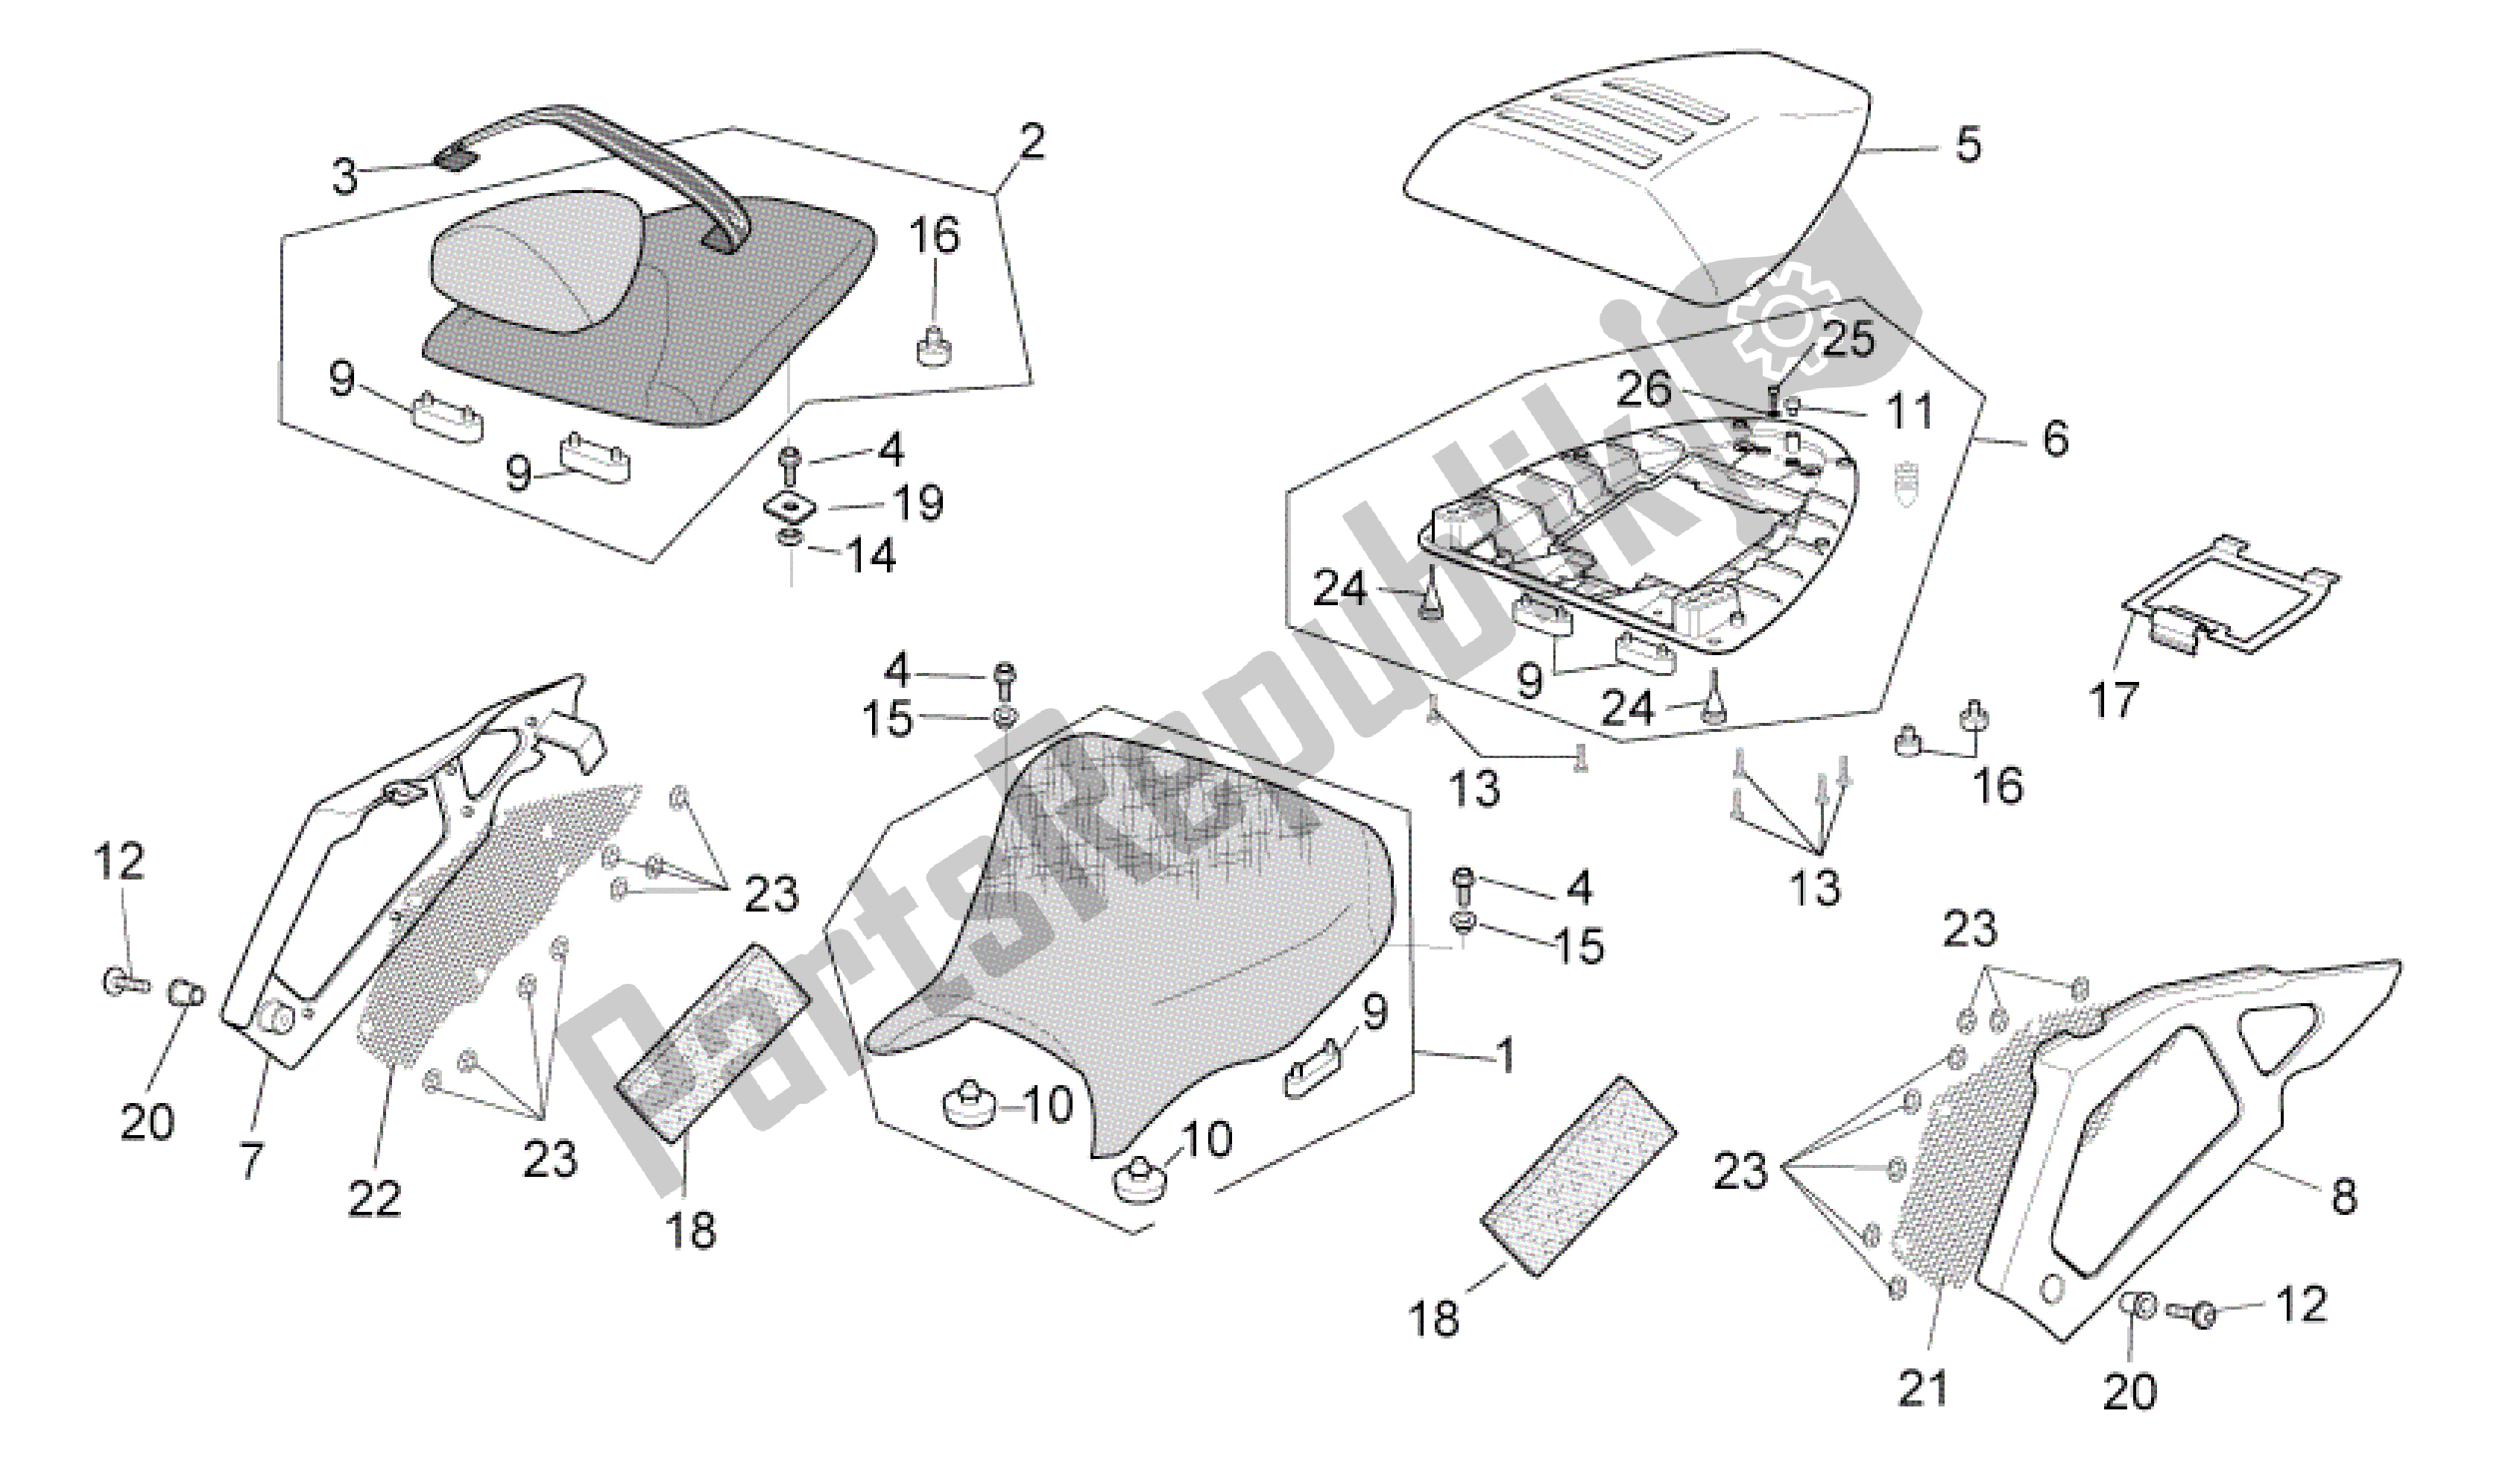 All parts for the Saddle of the Aprilia RSV Mille R 3963 1000 2003